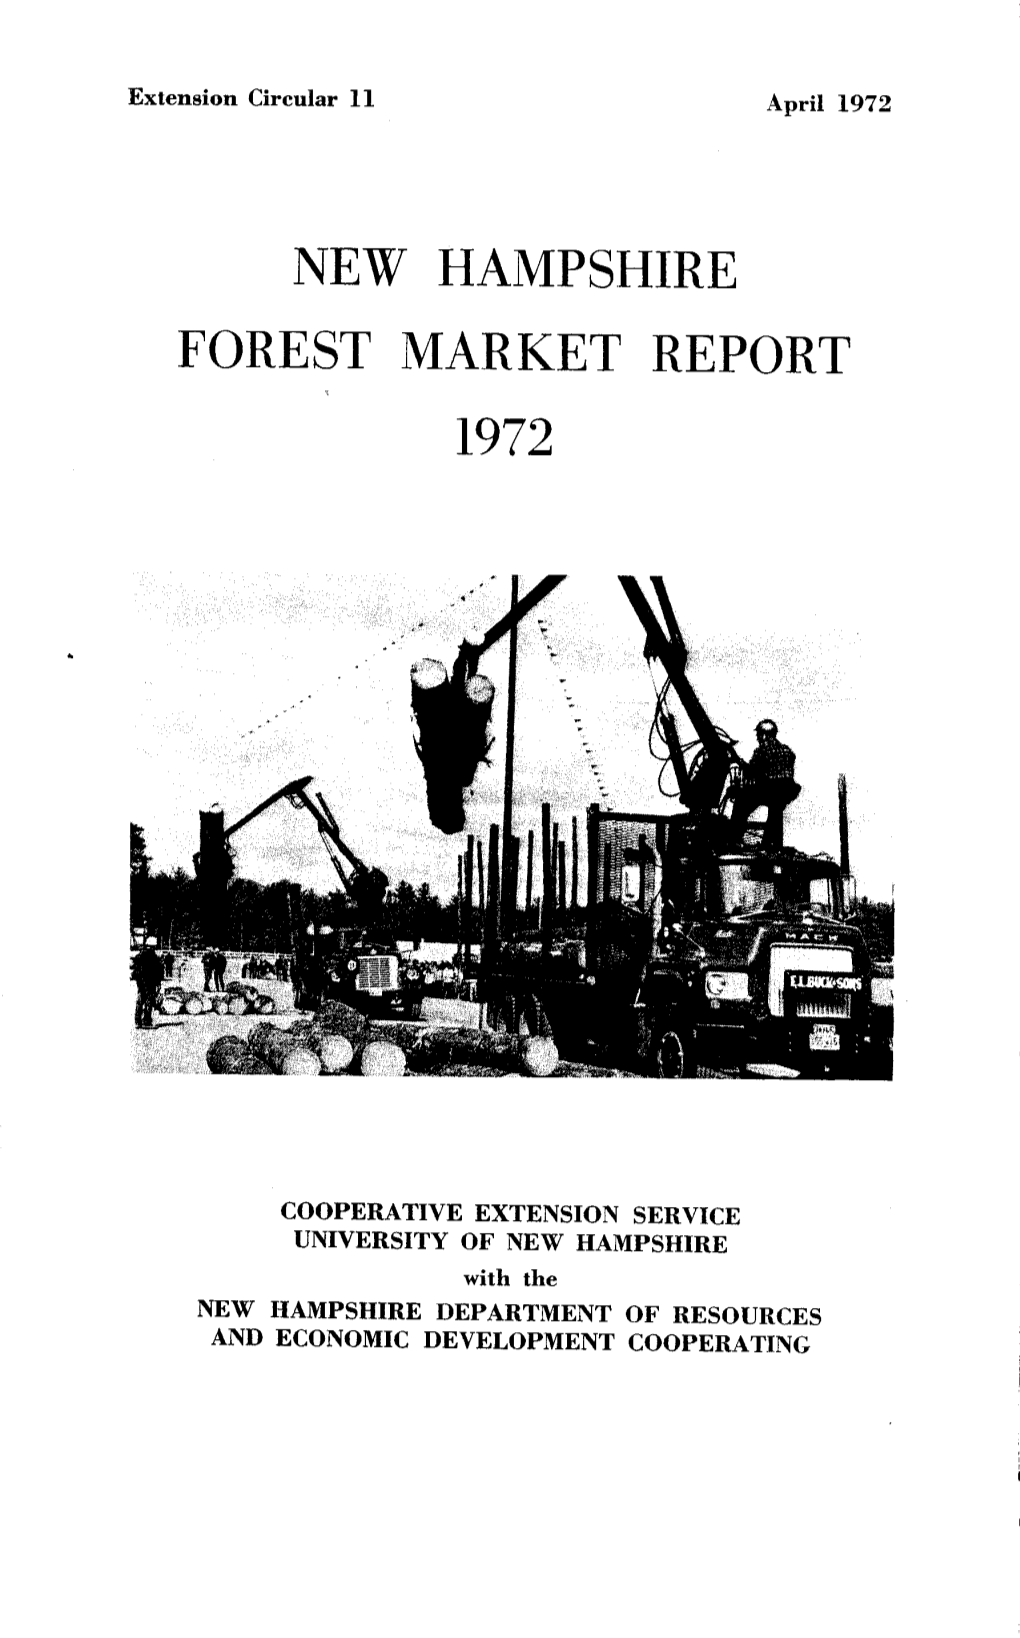 New Hampshire Forest Market Report 1972